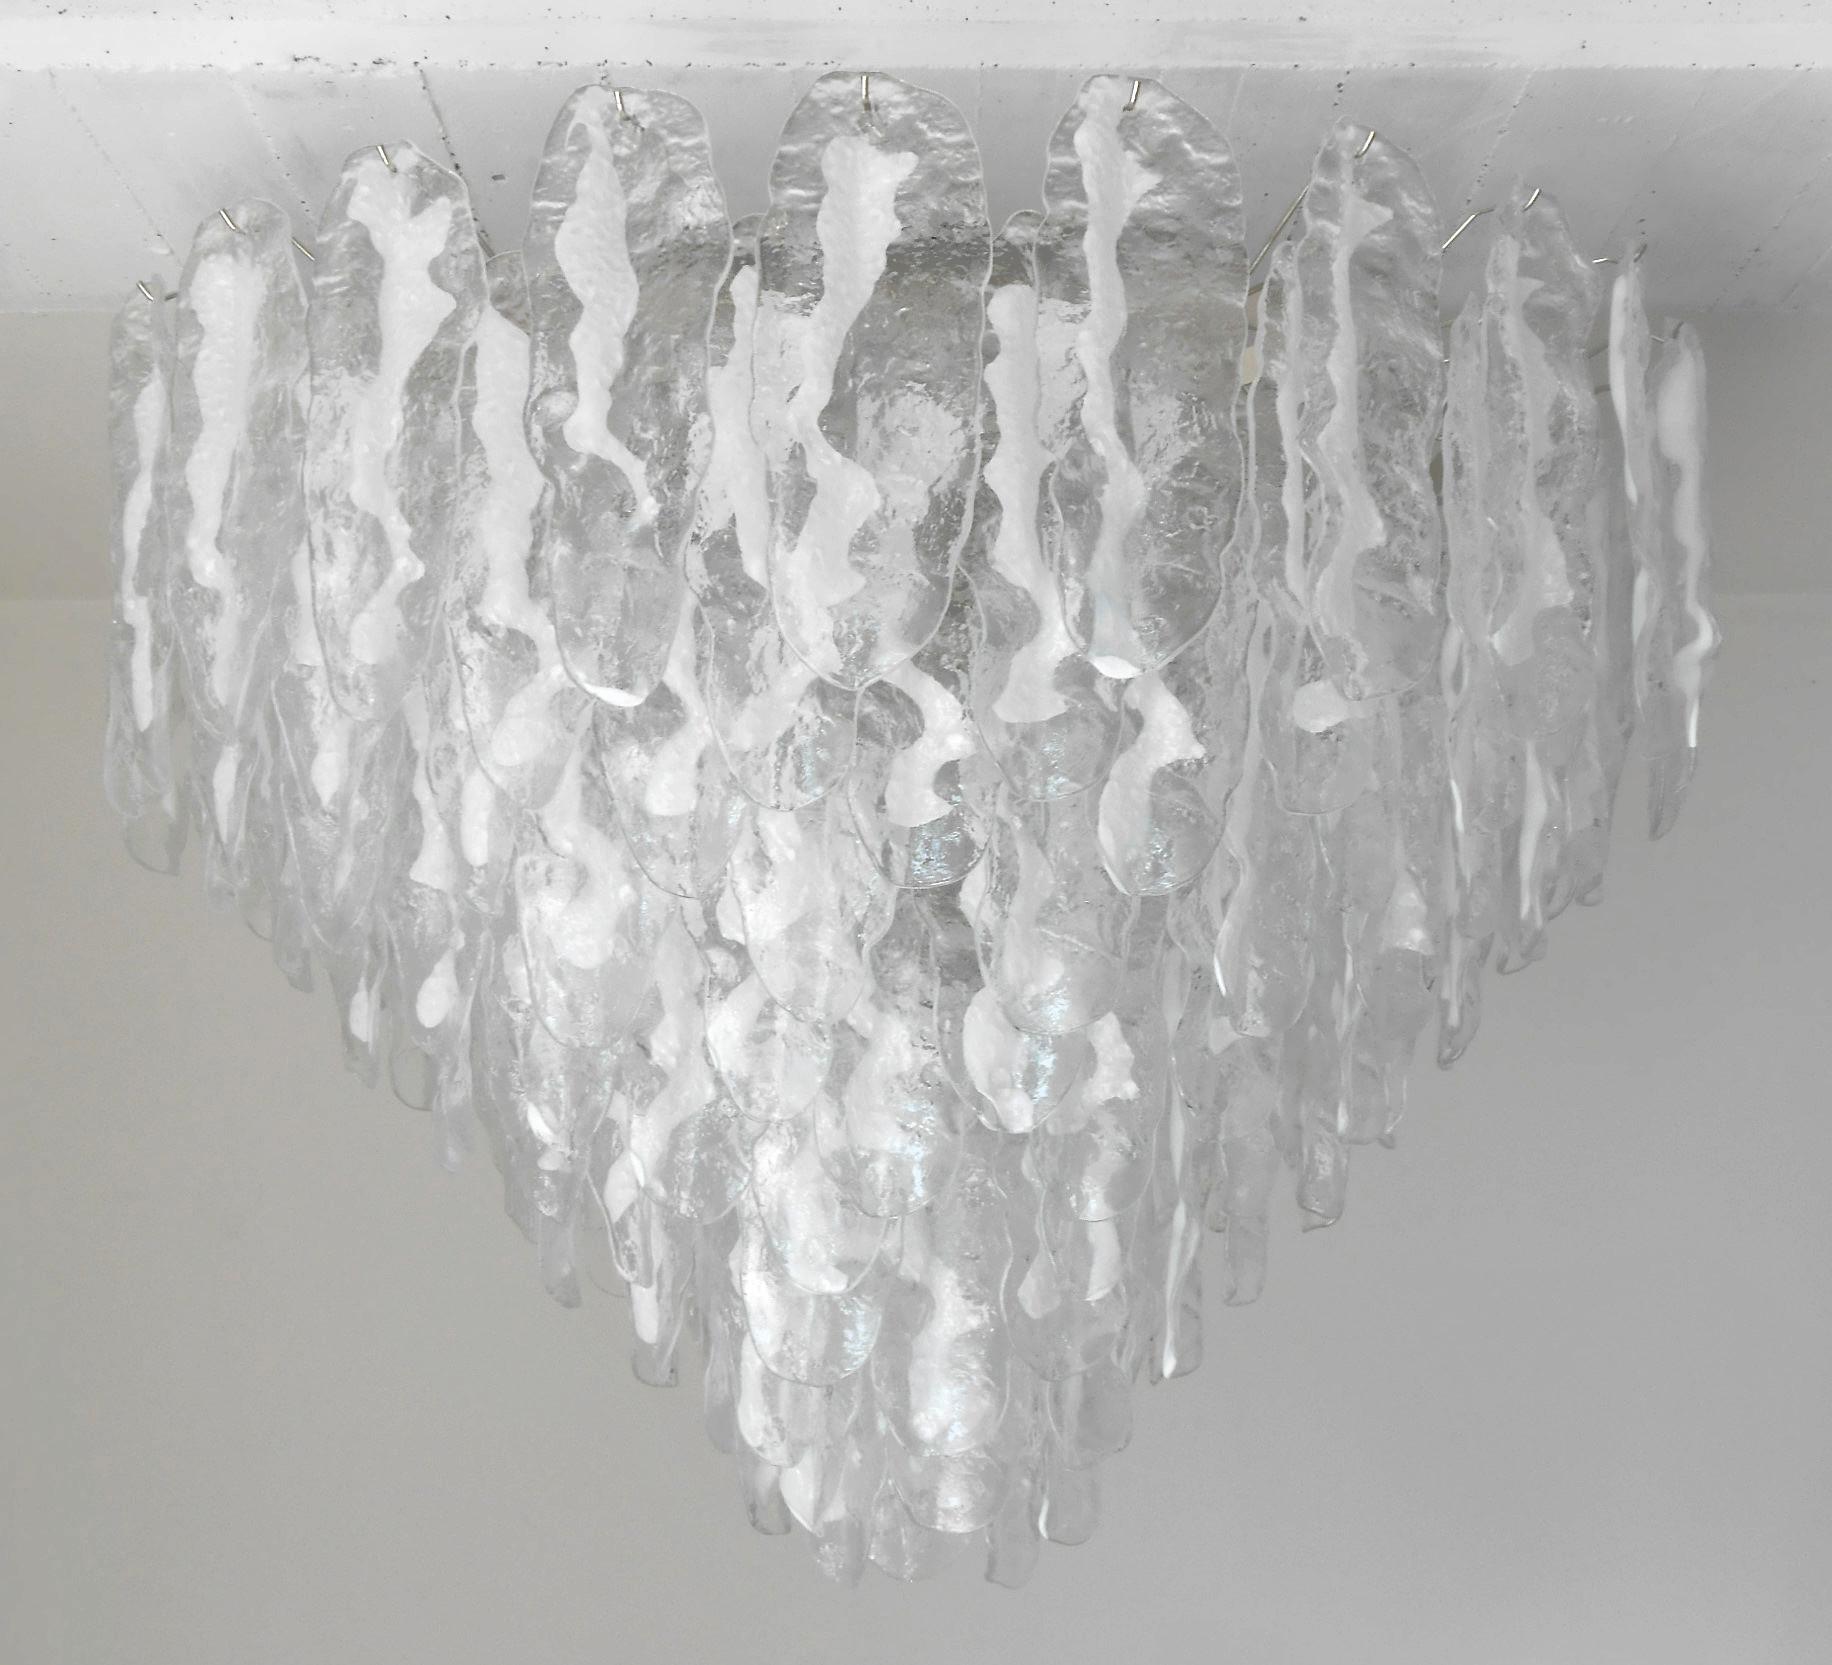 Italian chandelier shown with hand blown clear and milky white Murano glass leaves, mounted on chrome finish frame by Fabio Ltd / Made in Italy
21 lights / E26 or E27 type / max 60W each
Measures: diameter 45 inches / height 31.5 inches plus chain